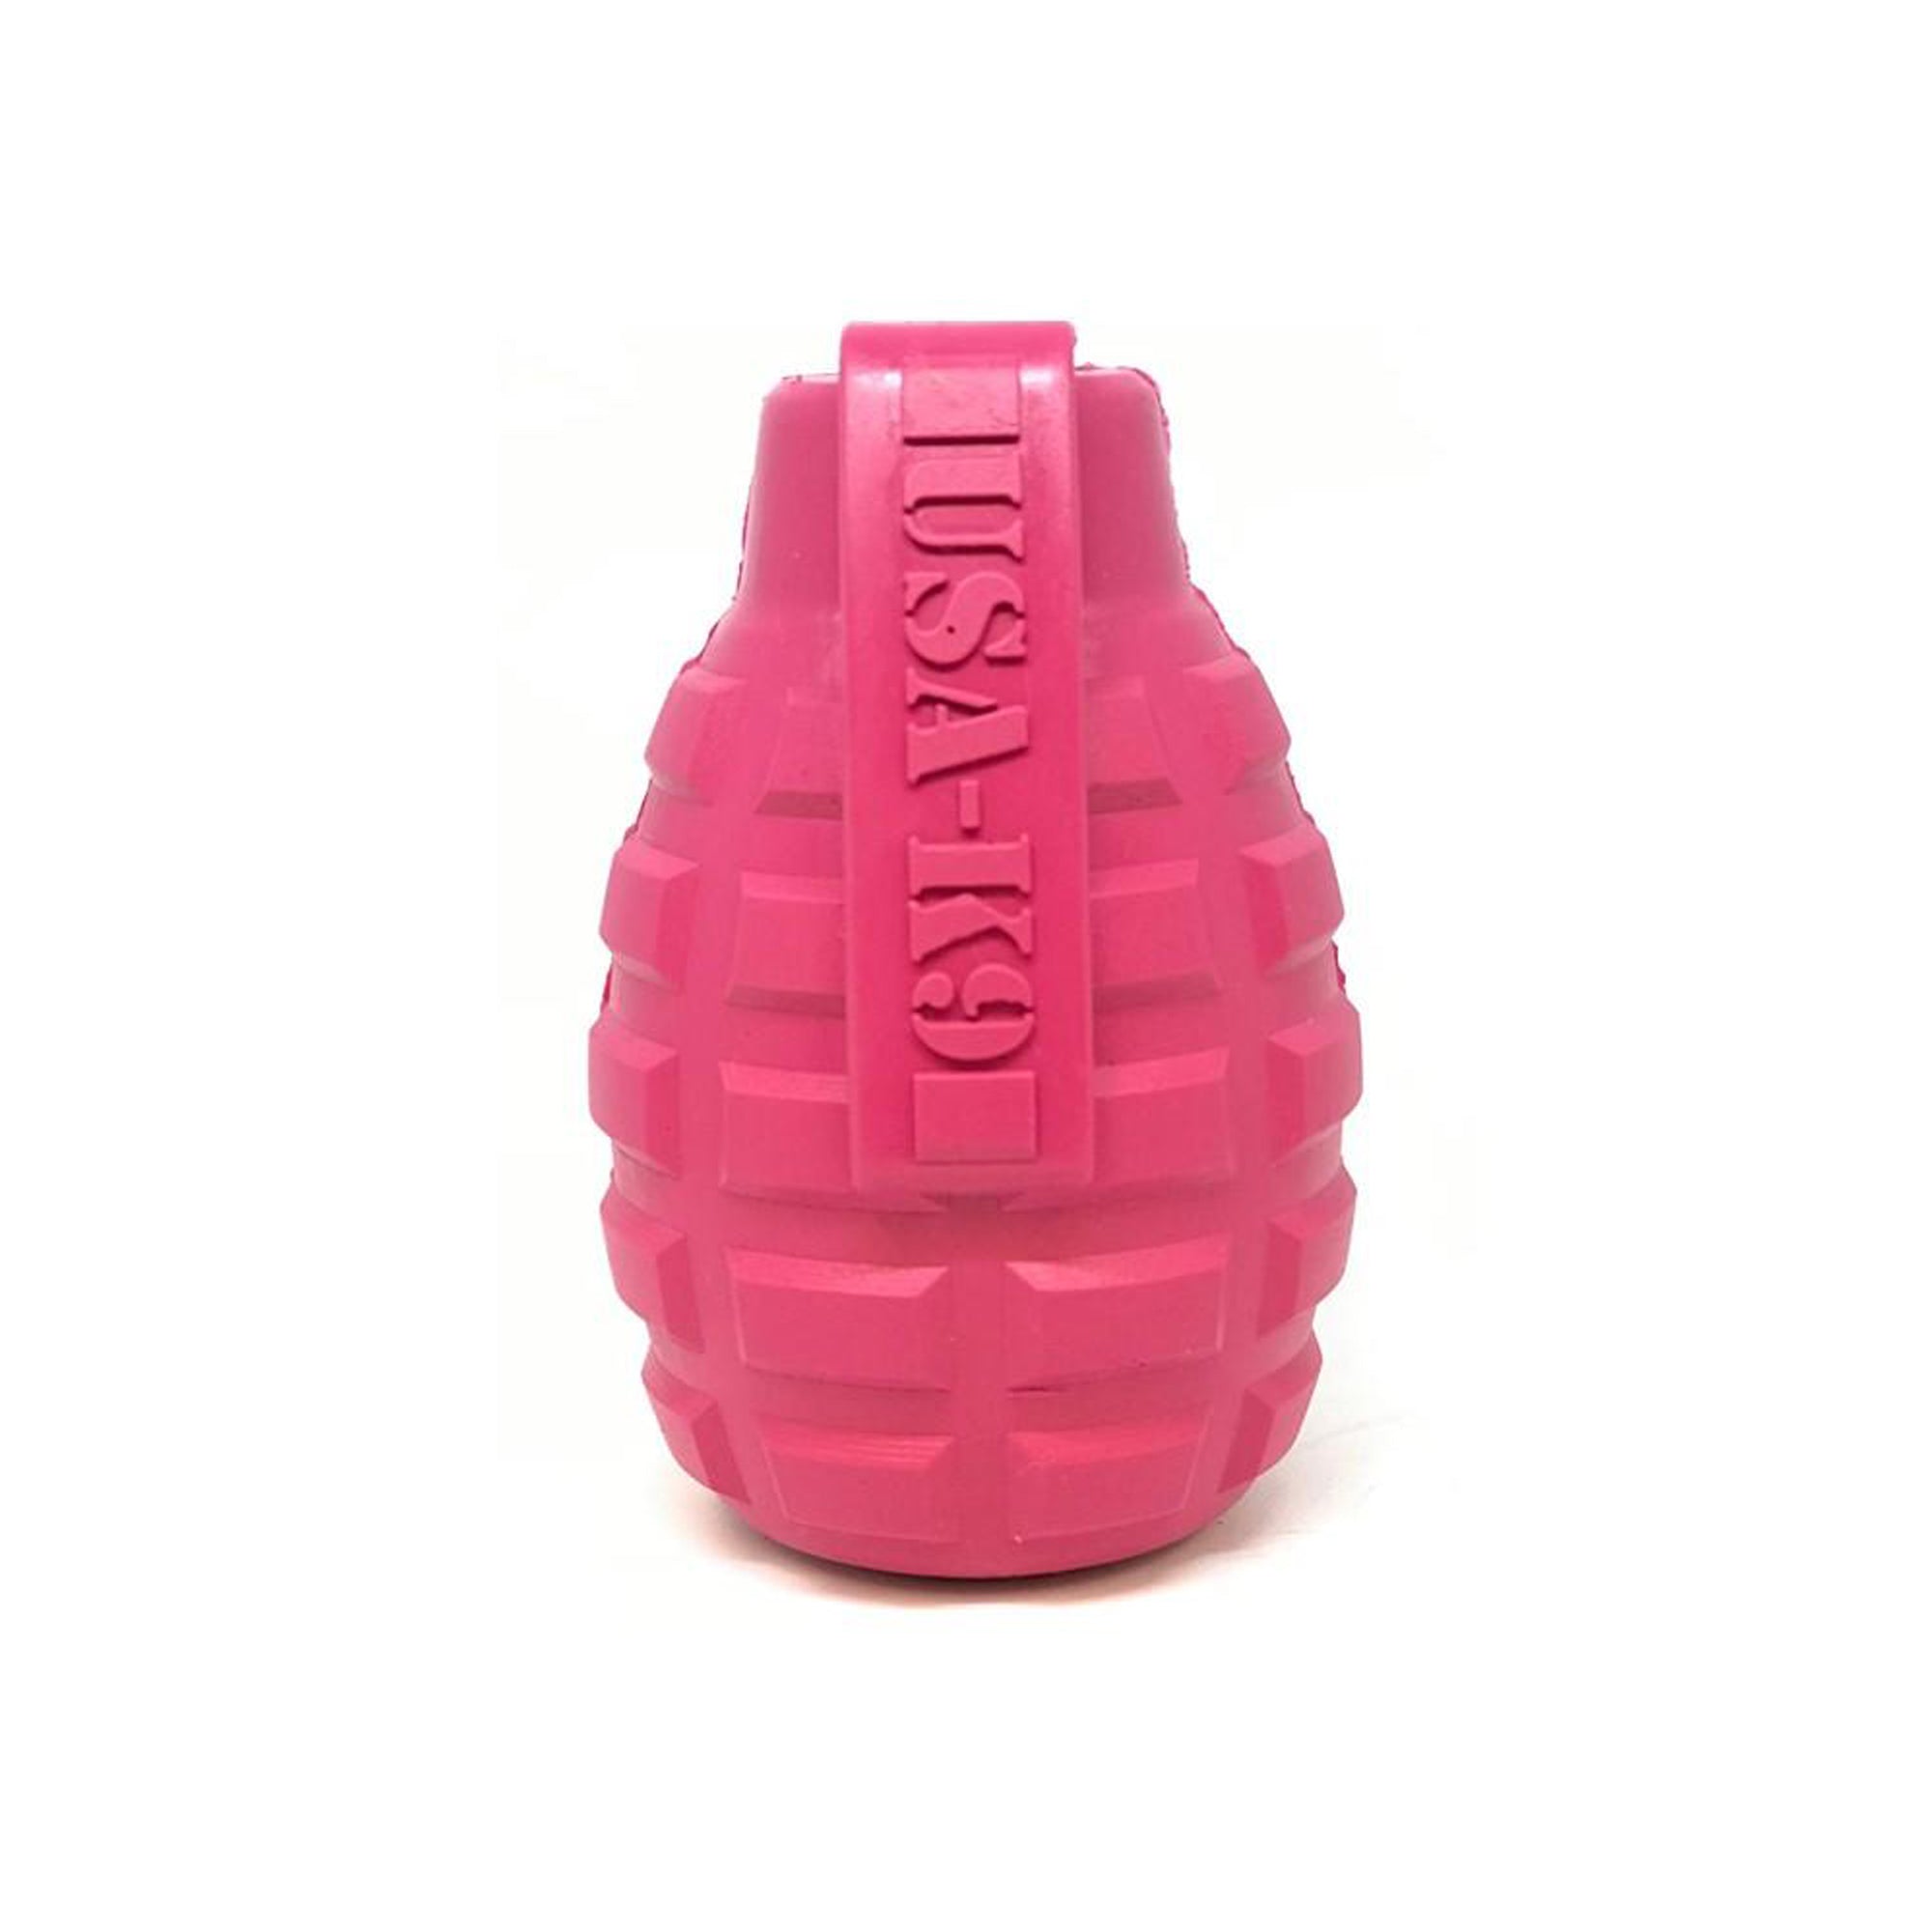 USA-K9 Puppy Grenade Durable Rubber Chew Toy &amp; Treat Dispenser for Teething Pups